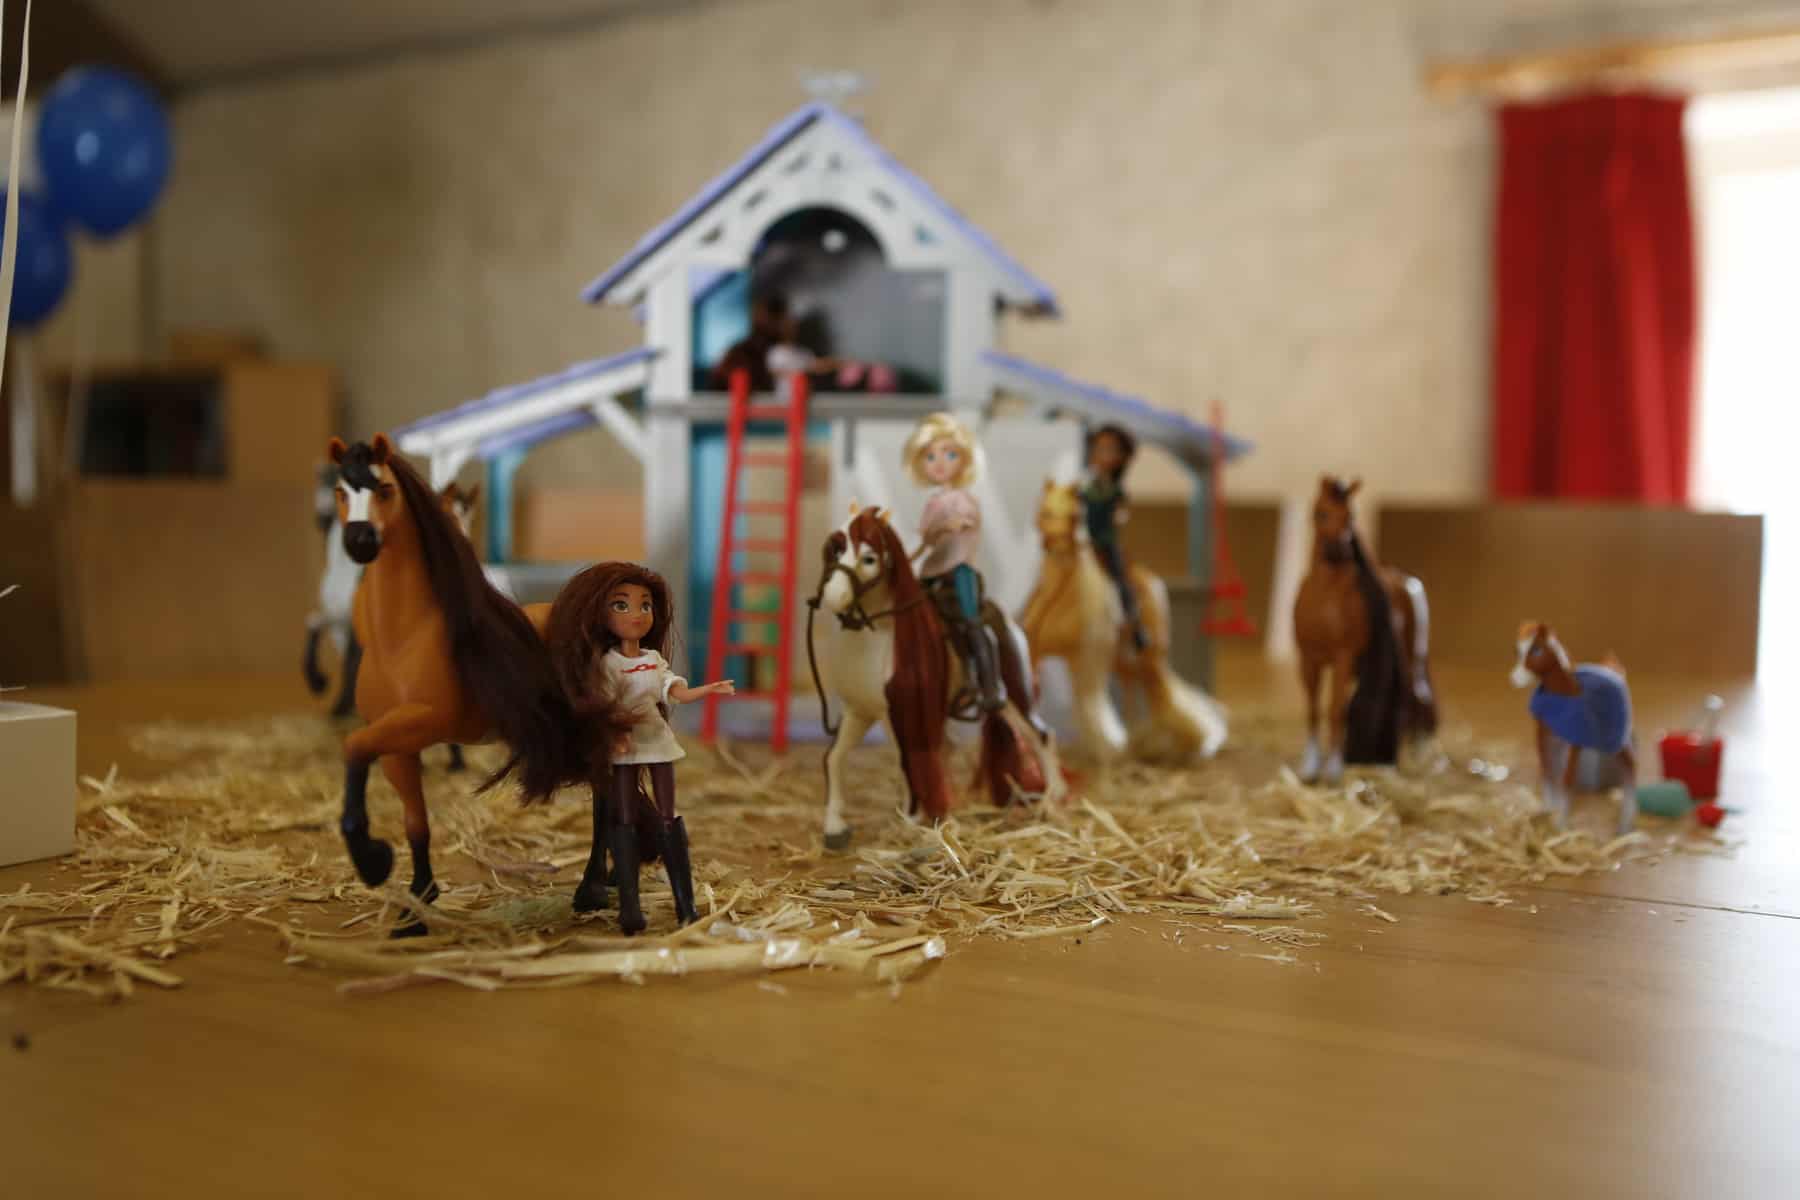 Spirit Riding Free Stable Sleepover stable toy with horses and characters